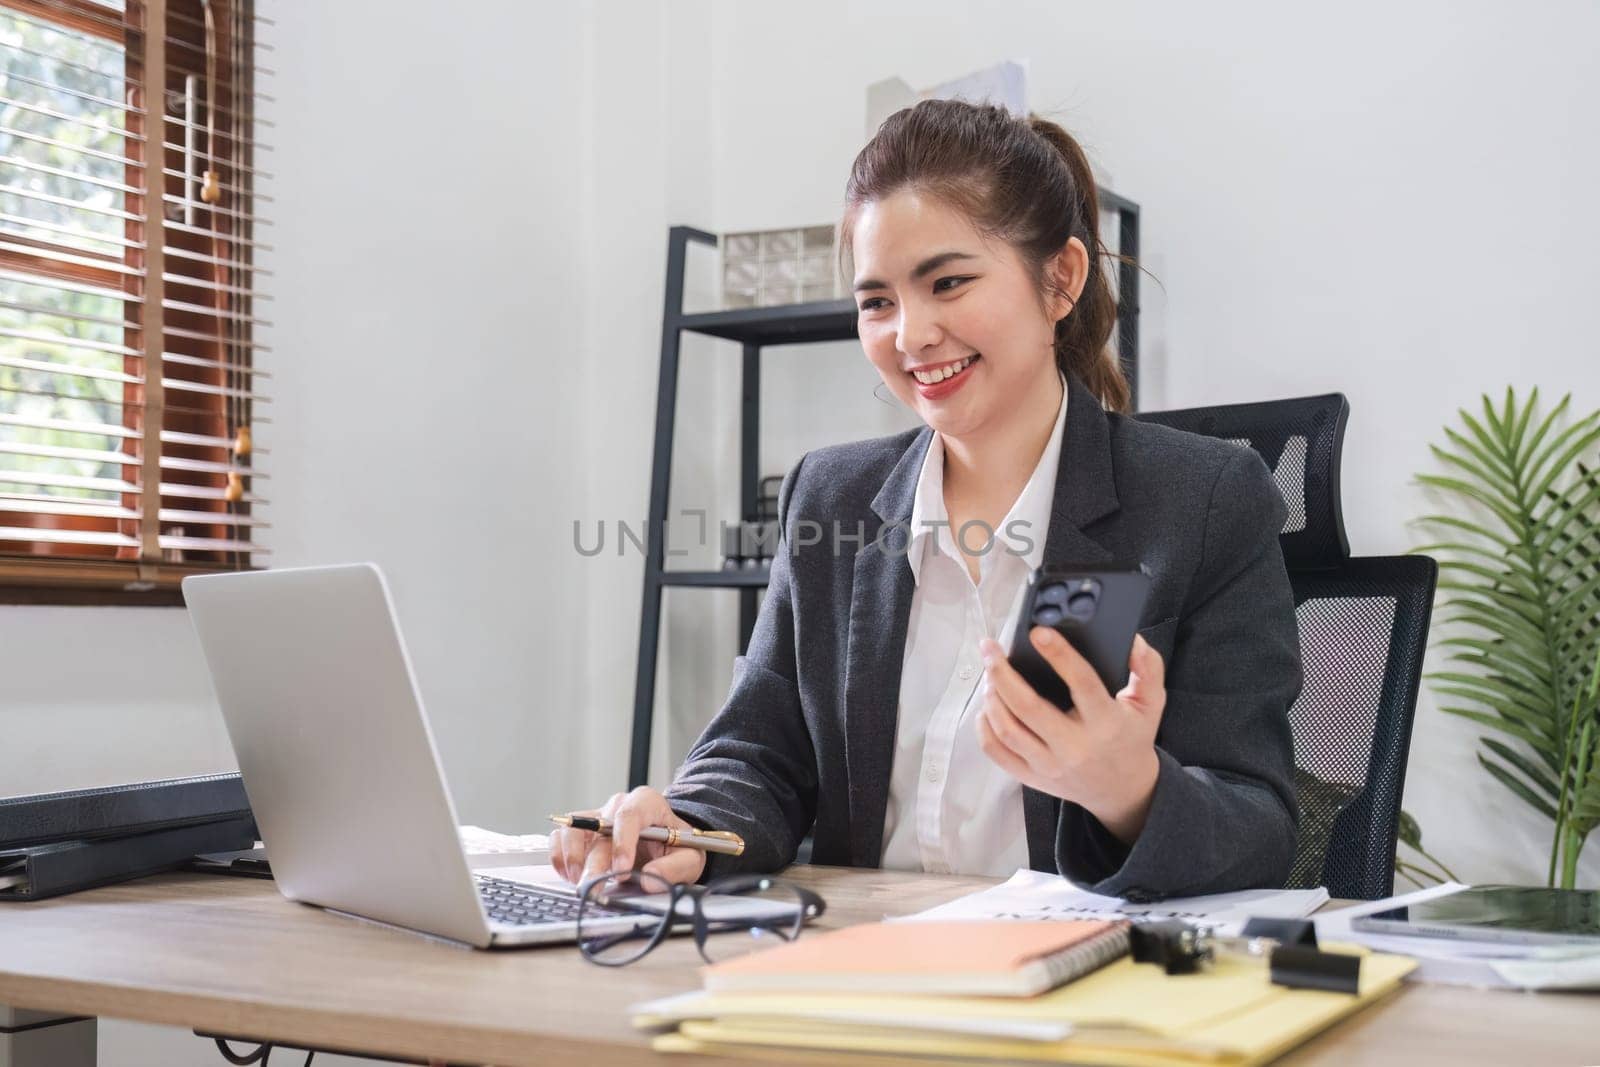 Businesswoman talking on business phone and using laptop to do finance, mathematics on wooden table in office and business background, tax, accounting, statistics and analytical research concepts. by wichayada